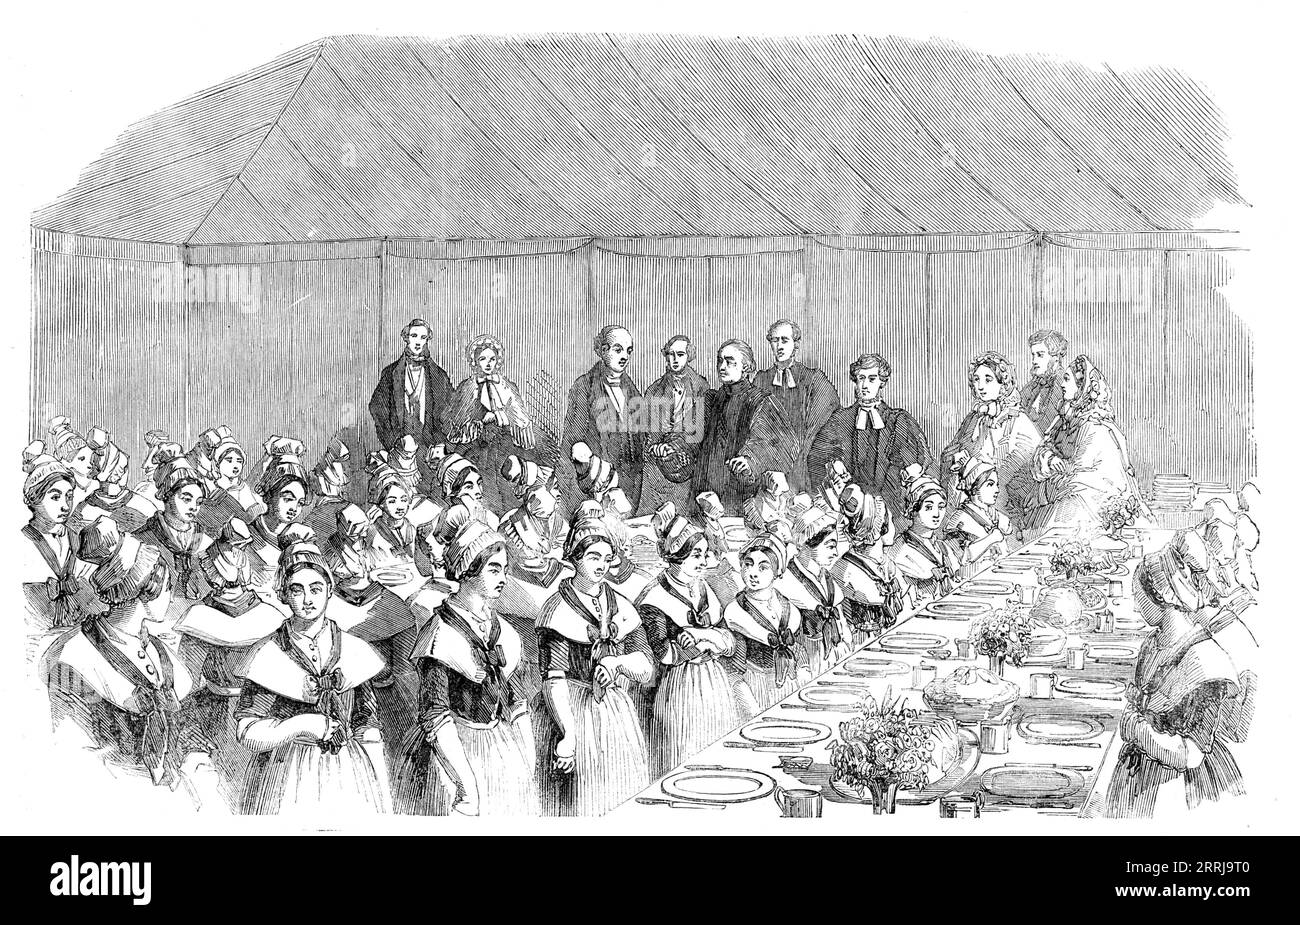 The Centenary Fete of the Asylum for Female Orphans - the Archbishop of Canterbury Saying Grace, 1858. 'The object of the charity is to provide a home for orphan girls, who are admitted between the ages of eight and eleven years. They are brought up as domestic servants, and at a proper age are apprenticed into respectable private families...During the one hundred years this benevolent design has been in operation 2880 orphans have been admitted, nearly the whole of whom have been apprenticed...it was thought that, if a number [of orphans] could be assembled together, it would be the best evid Stock Photo